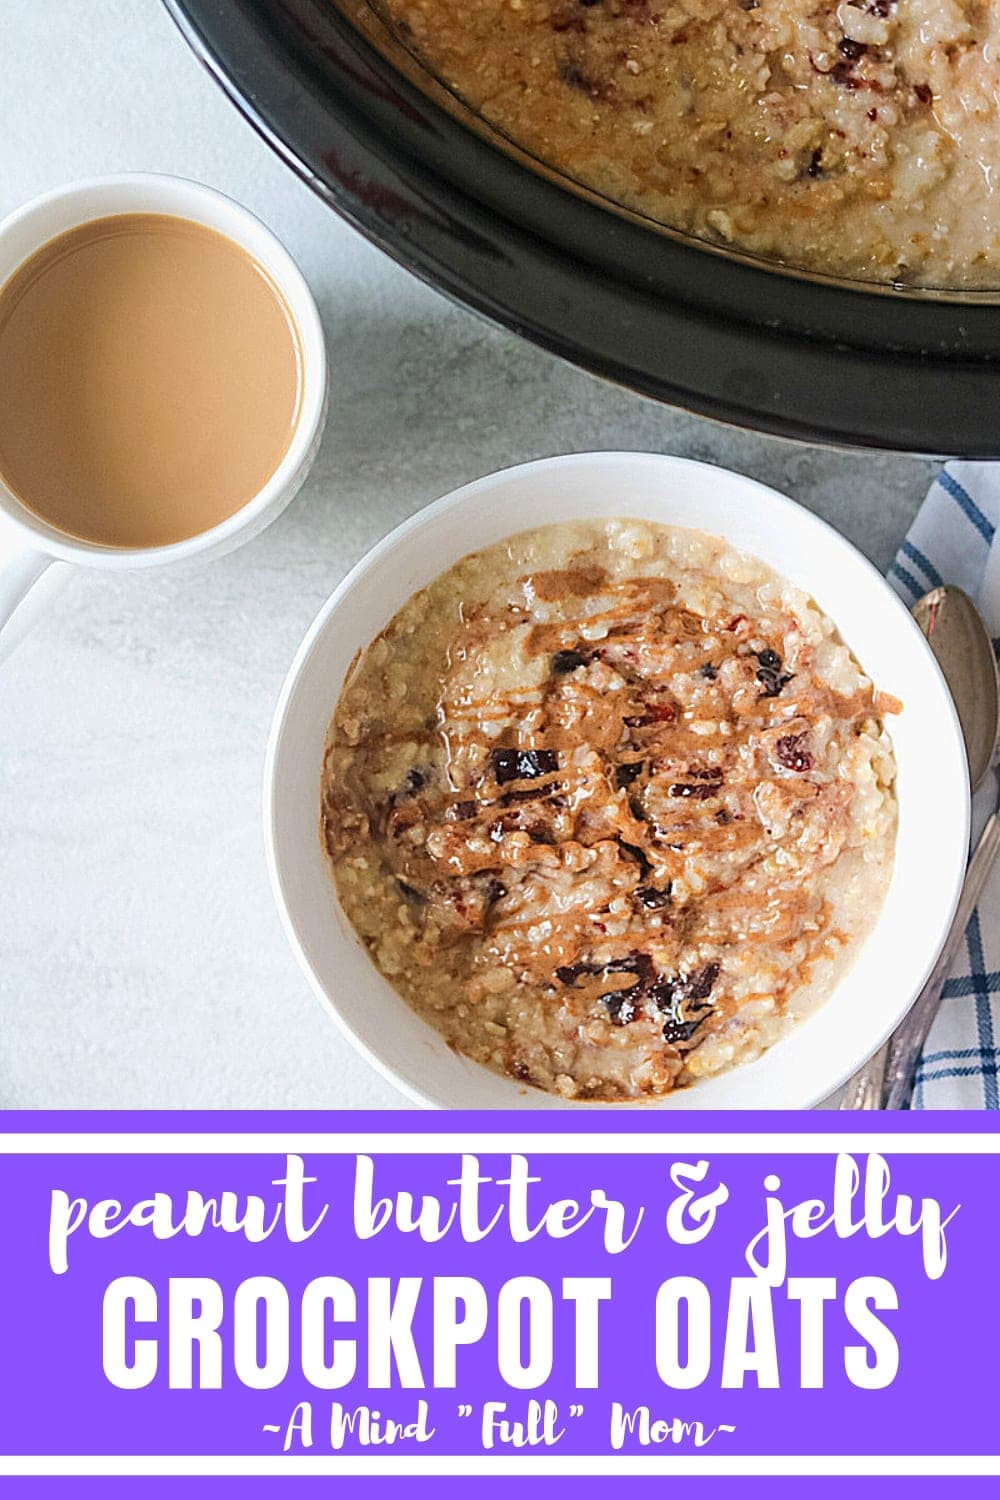 With only 5 minutes of prep, you can prepare peanut butter and jelly steel cut oatmeal that will cook overnight for an easy, healthy breakfast that is ready when you wake up.  #oatmeal #glutenfree #crockpot #overnightoatmeal #steelcutoats #slowcooker #breakfastrecipe